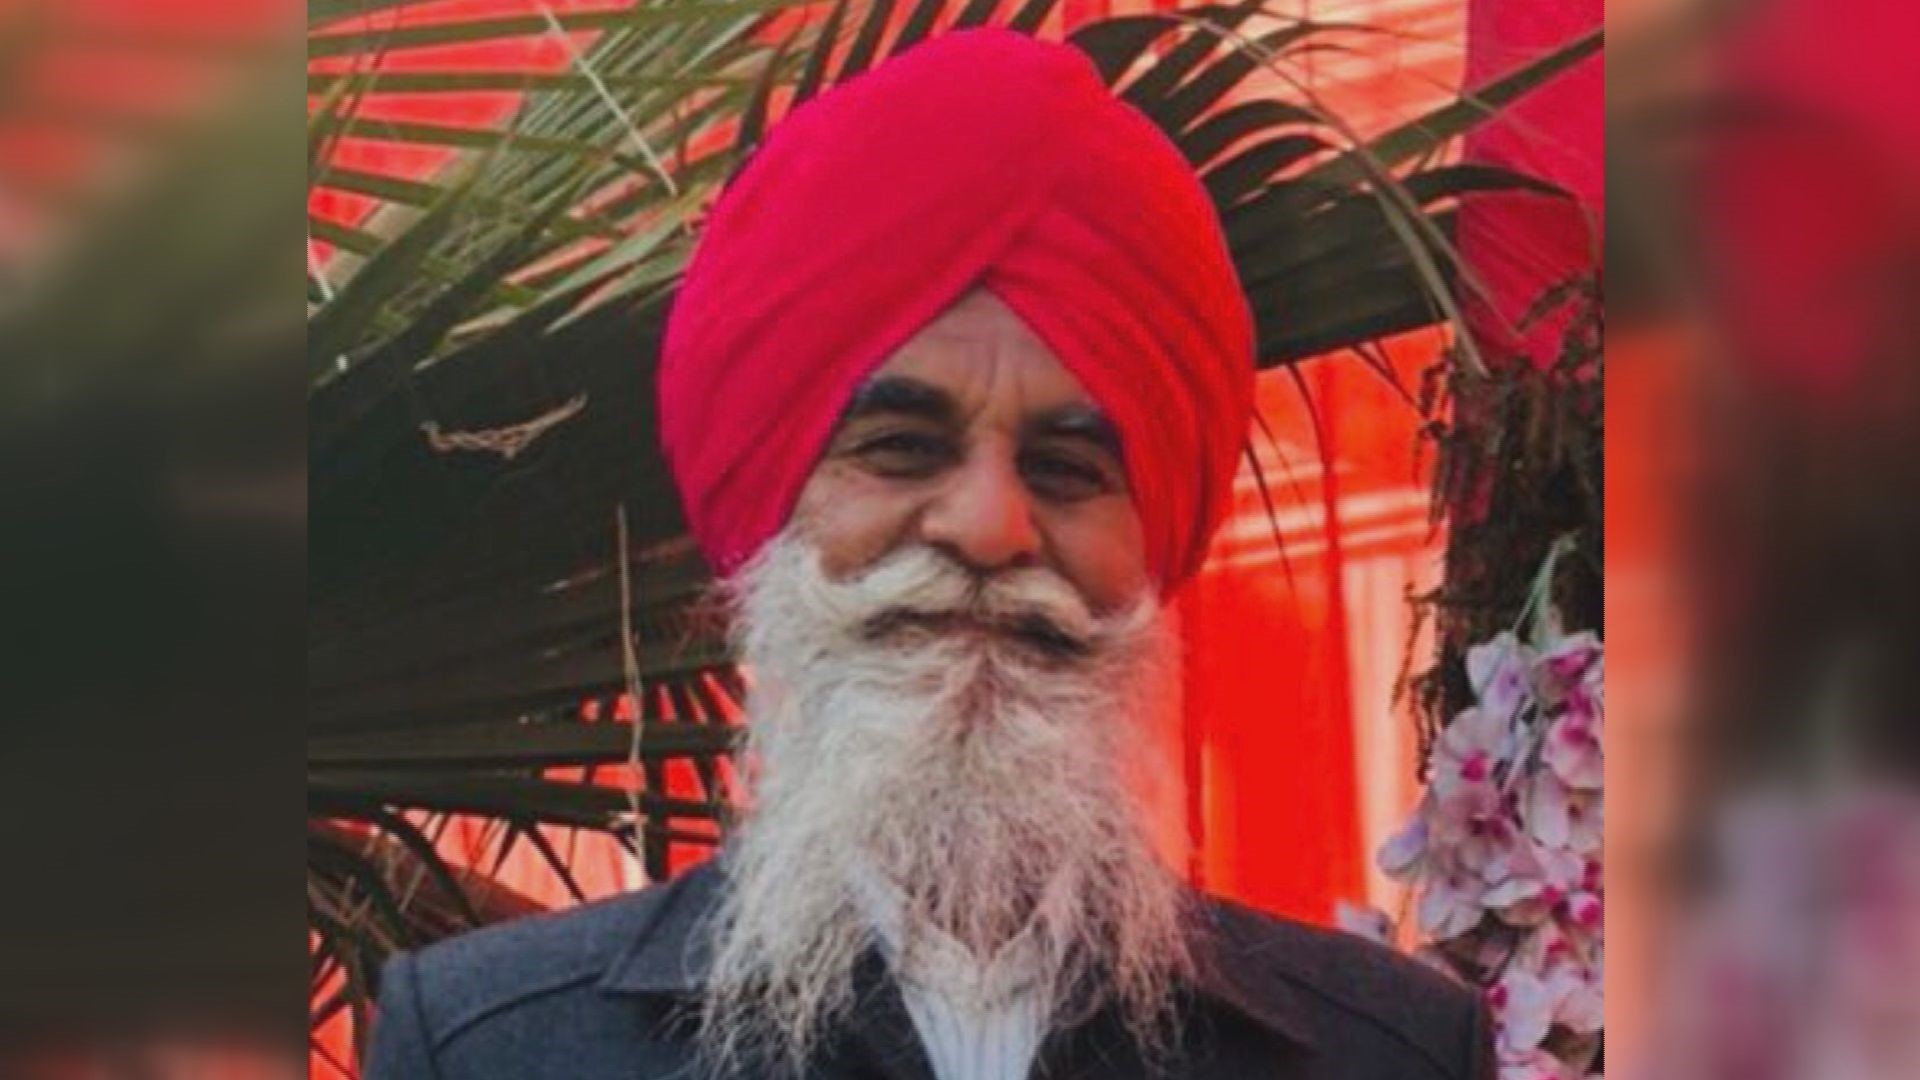 Police say 64-year-old Parmjit Singh of Tracy was brutally stabbed while he was on his evening walk in Gretchen Talley Park on Sunday around 9 p.m.